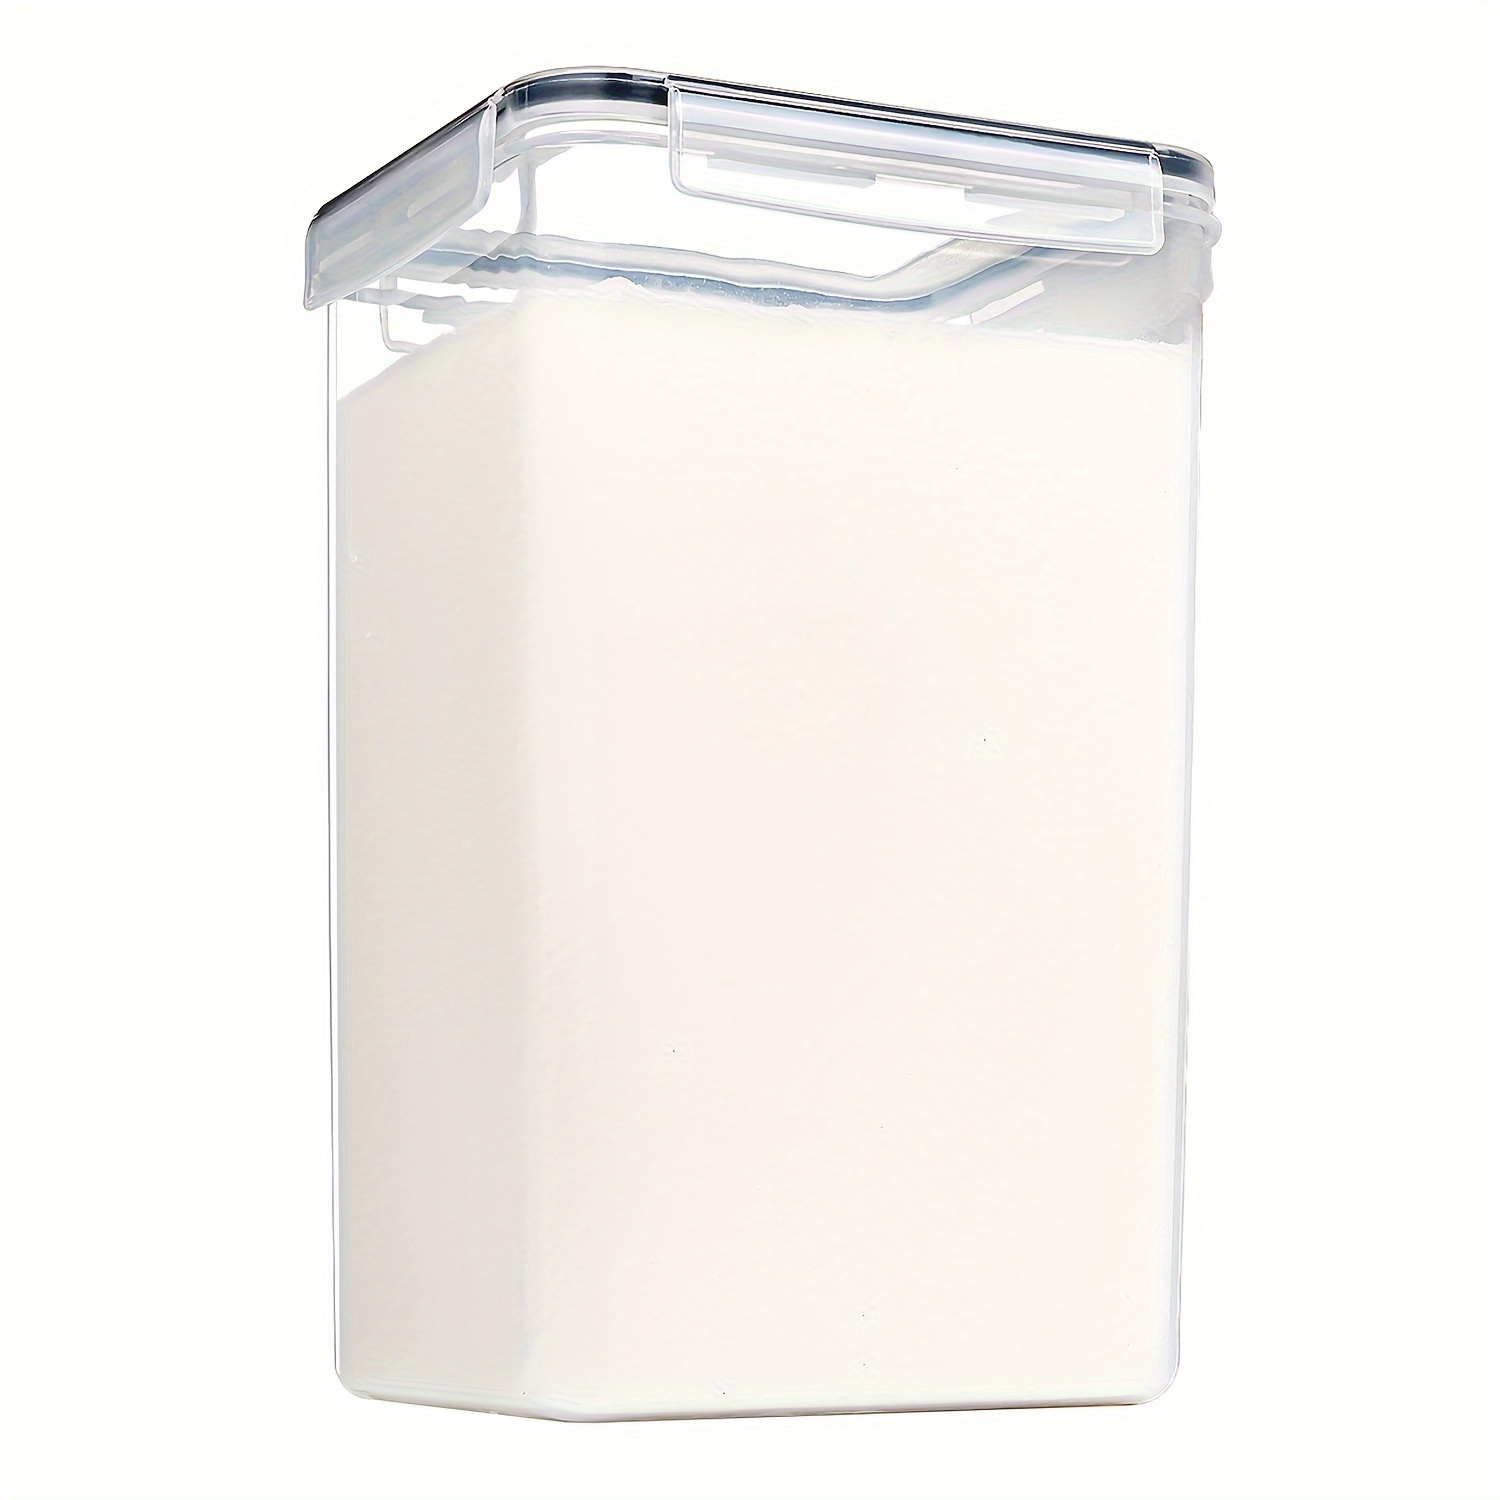 Large Airtight Food Storage Containers - Bulk Food Pantry